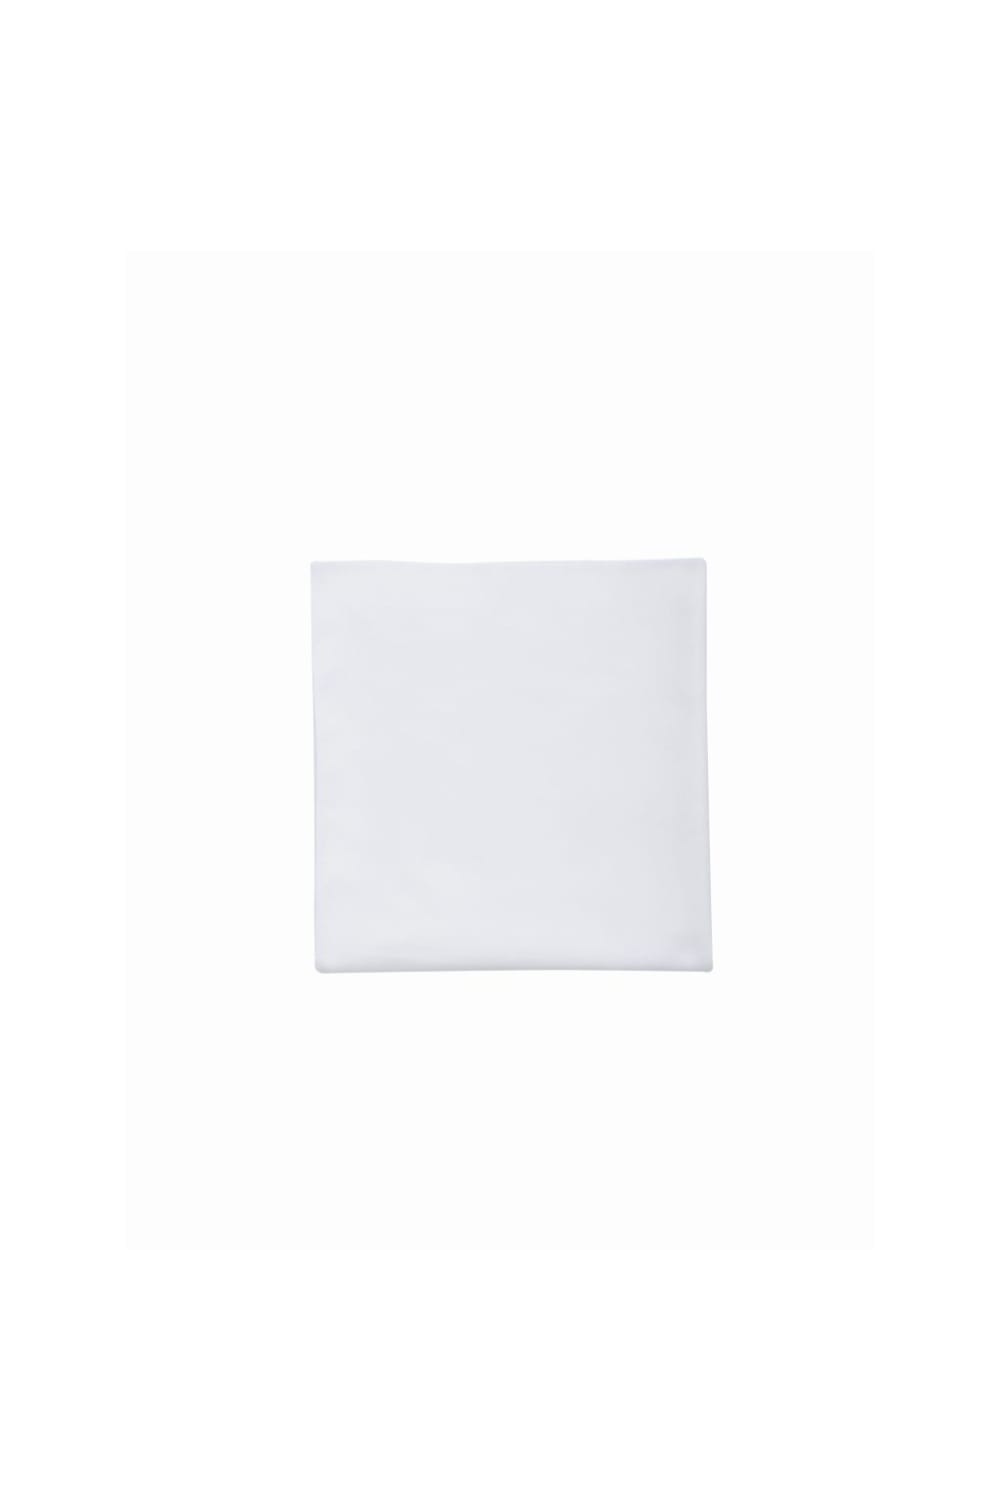 SOLS Atoll 30 Microfiber Guest Towel (White) (12 x 20 in)